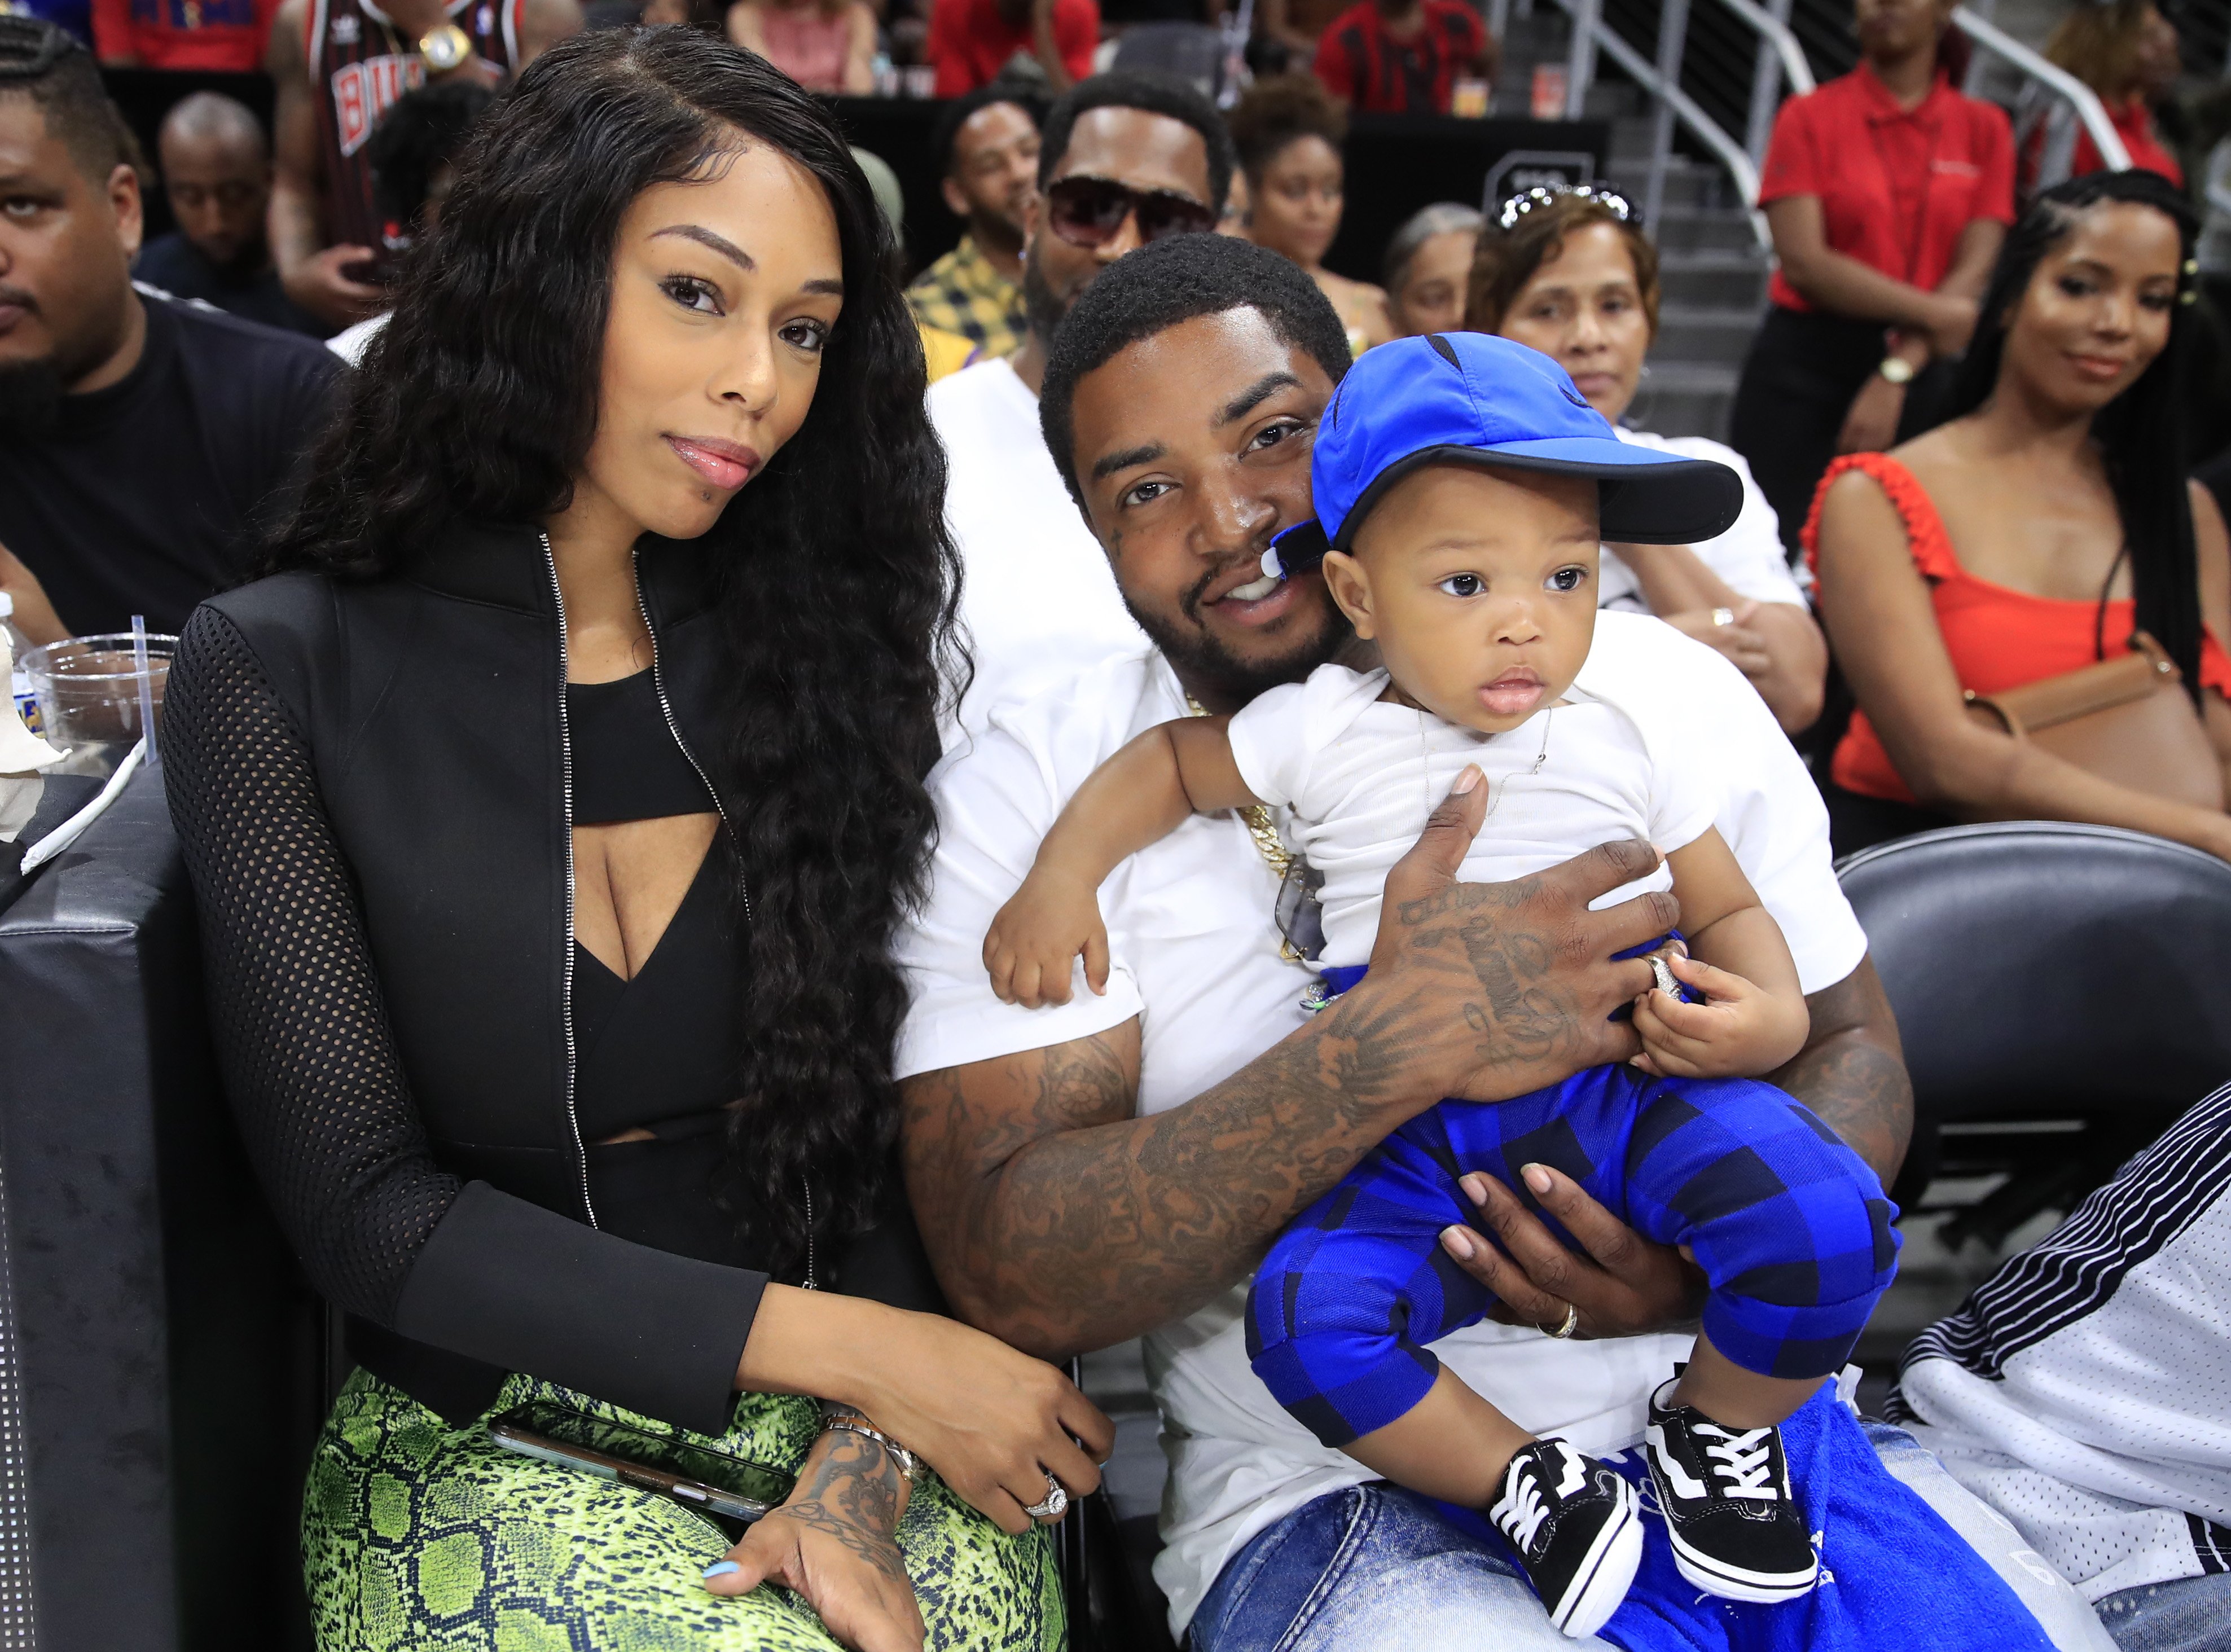 Bambi Benson, Lil Scrappy, and Breland at the game between Power and Trilogy at the State Farm Arena on July 7, 2019 in Atlanta, Georgia. | Photo: Getty Images